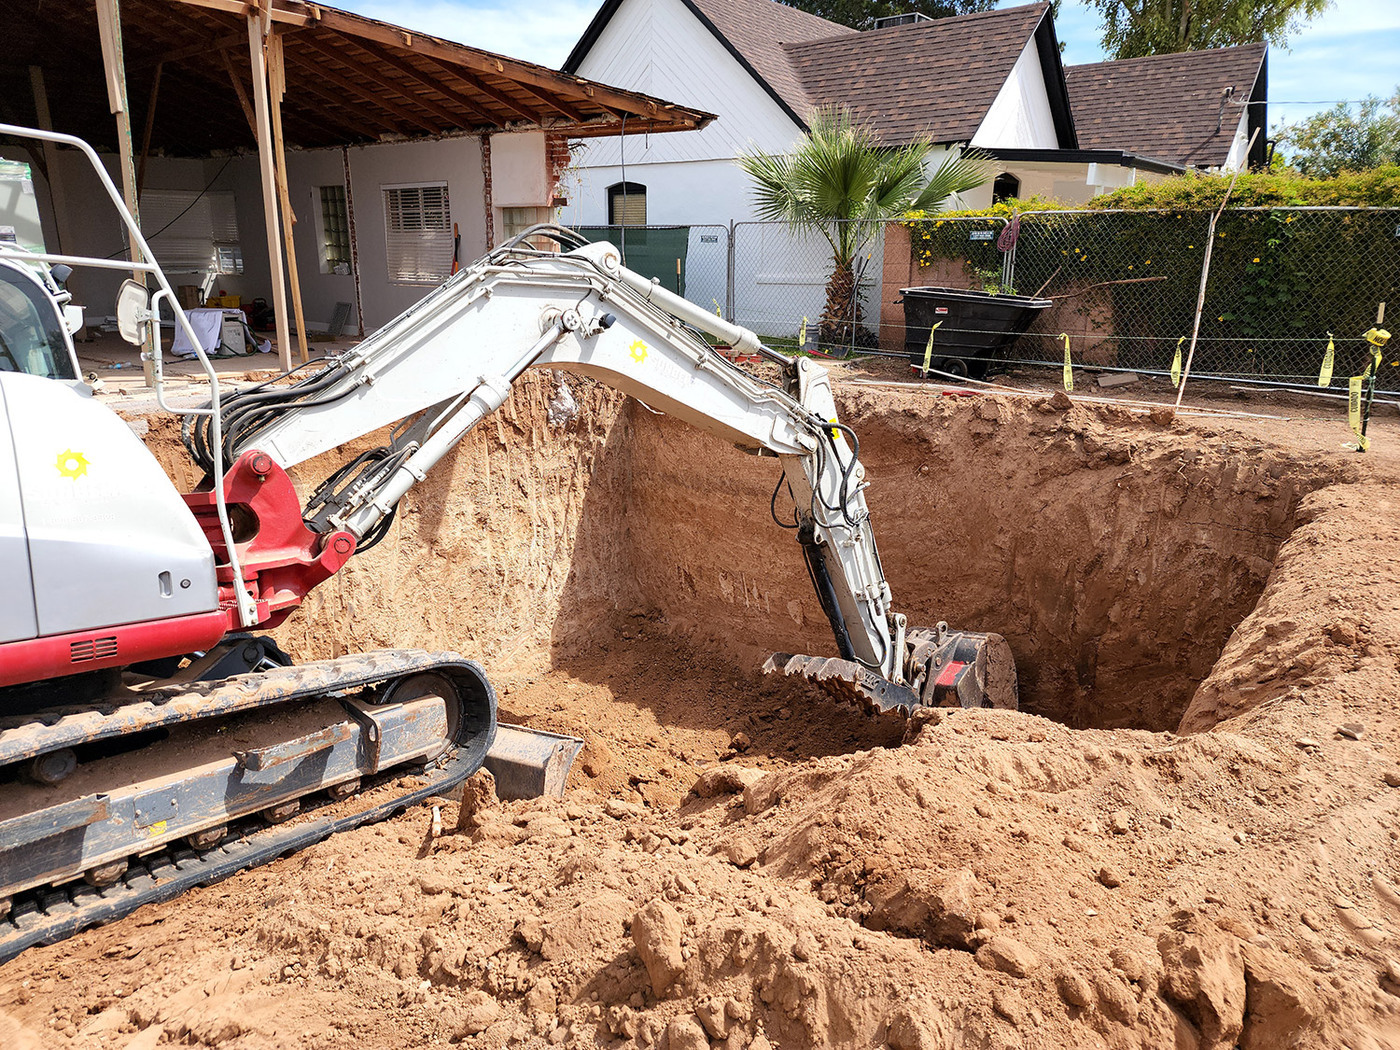 Based in Phoenix with over 20 years of experience,  Valleywide Dig and Haul can help with all of your demolition, excavation, and grading needs.